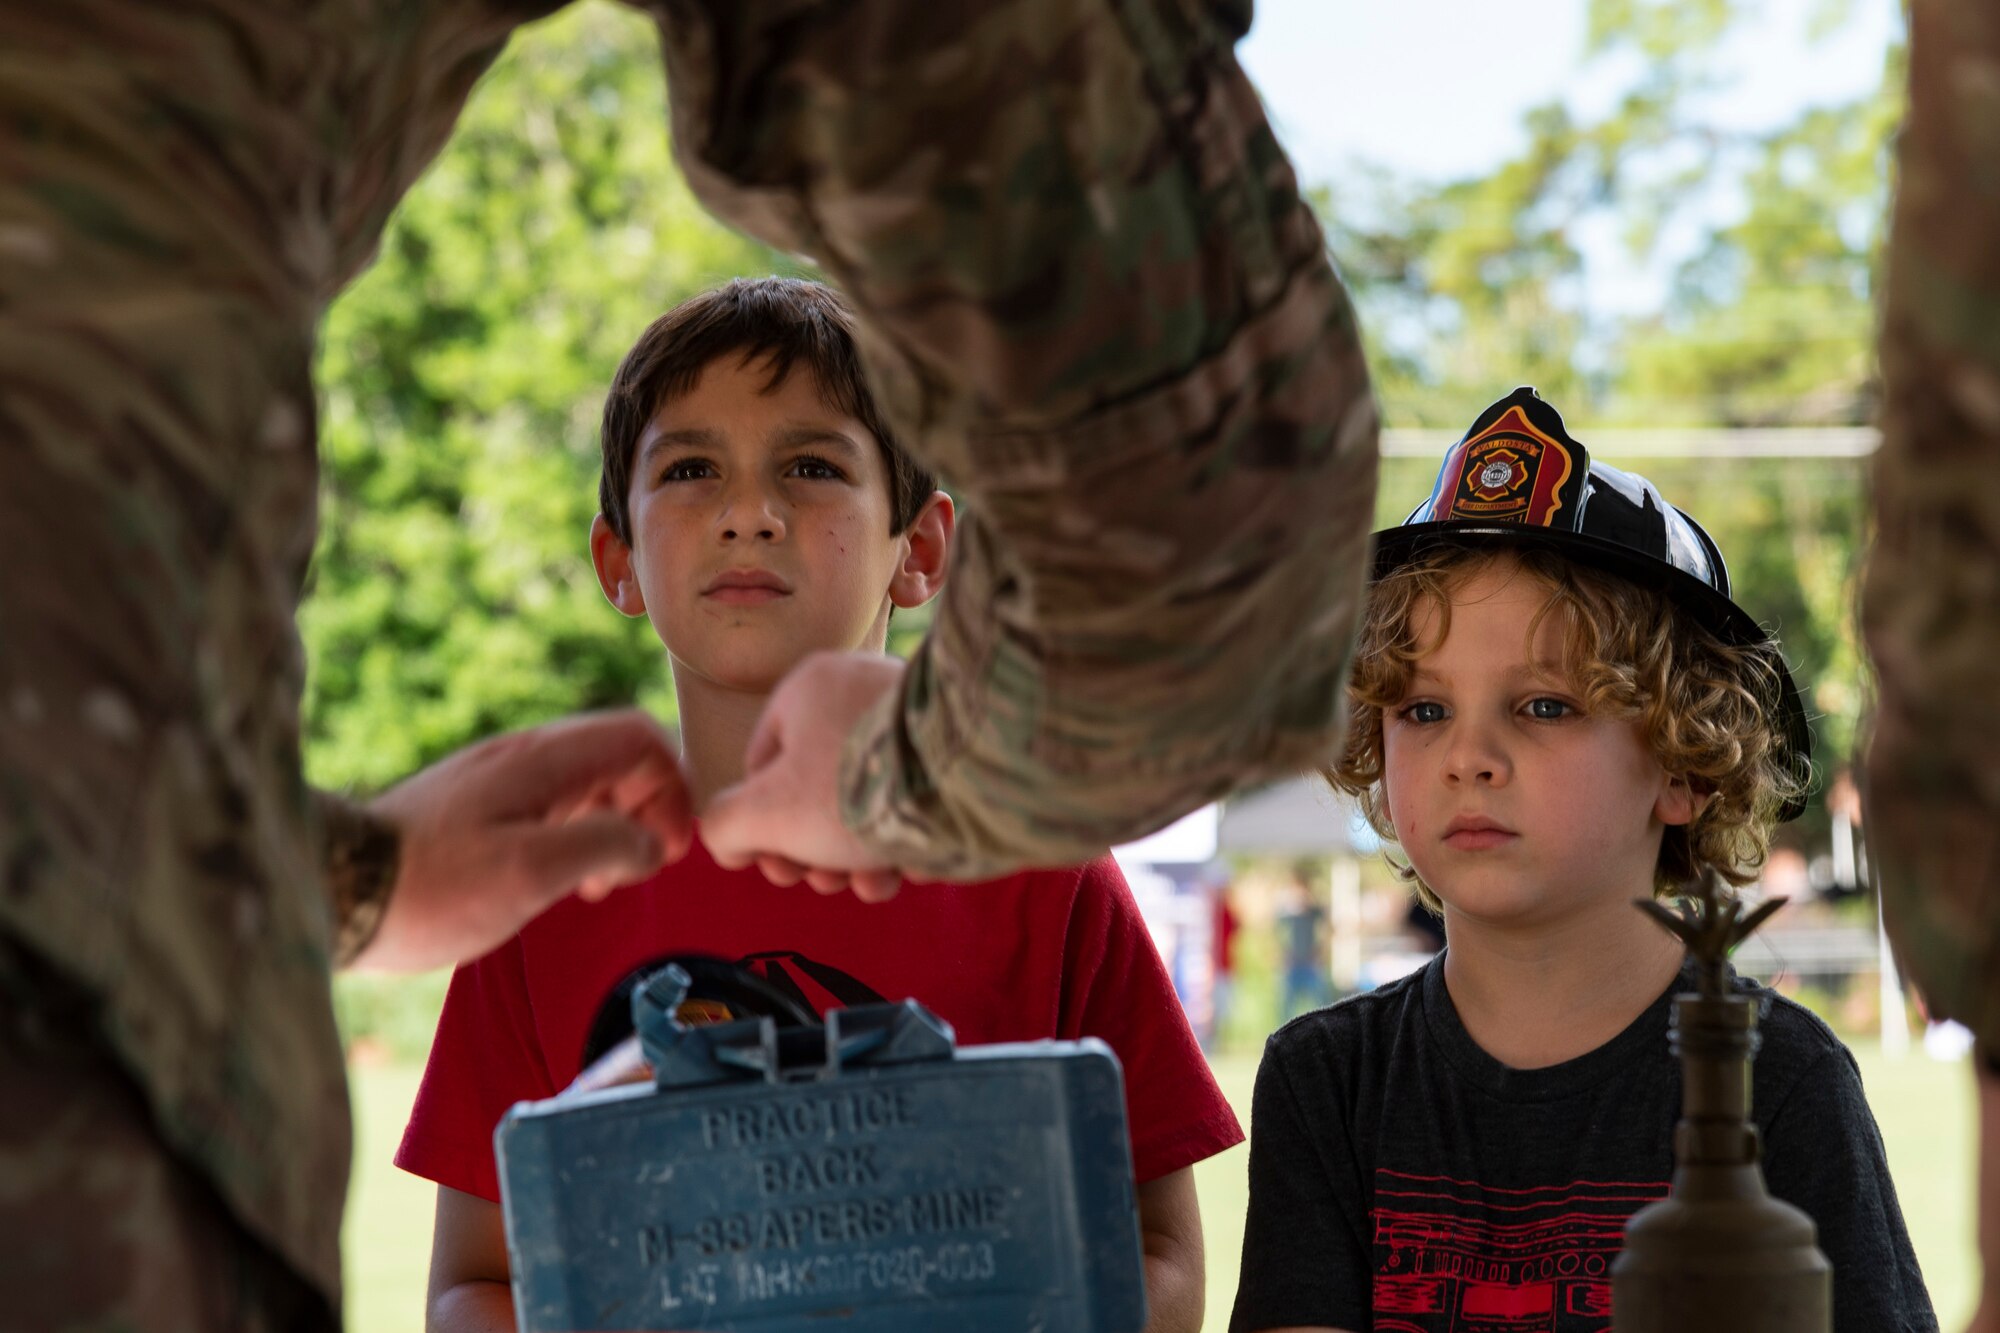 An Airman assigned to the 23d Civil Engineer Squadron (CES) performs an explosives ordnance disposal demonstration for participants of National Night Out at the main campus of Valdosta State University Aug. 6, 2019, in Valdosta, Ga. National Night Out is an annual event that promotes relationships between police and the community in an effort to prevent crime. Representatives from Team Moody participated to create local community awareness and build support for the Air Force mission. (U.S. Air Force photo by Airman 1st Class Hayden Legg)